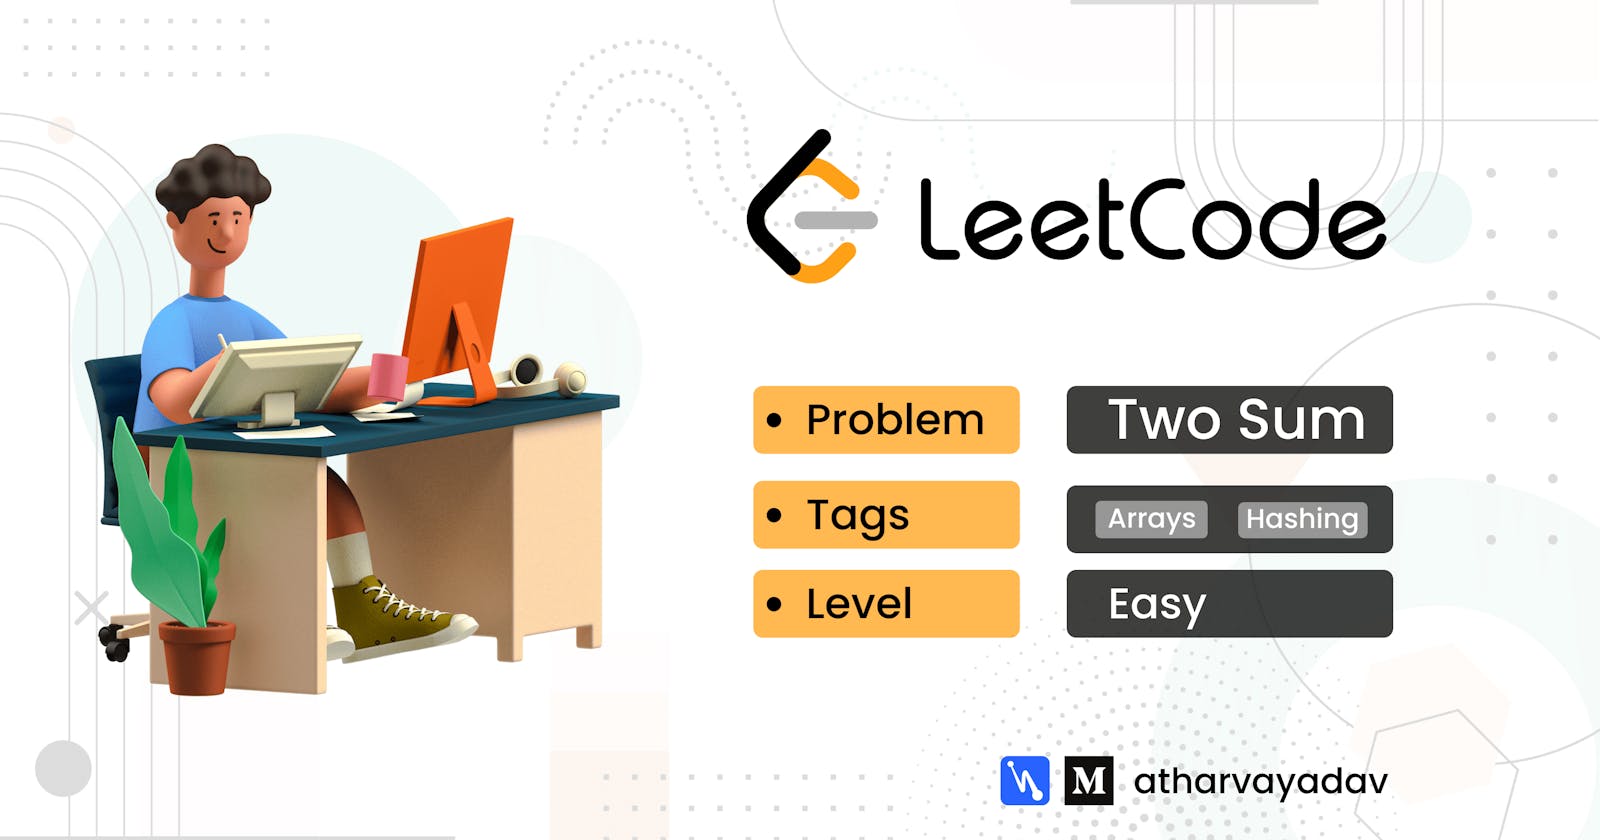 1. Two Sum LeetCode Solution